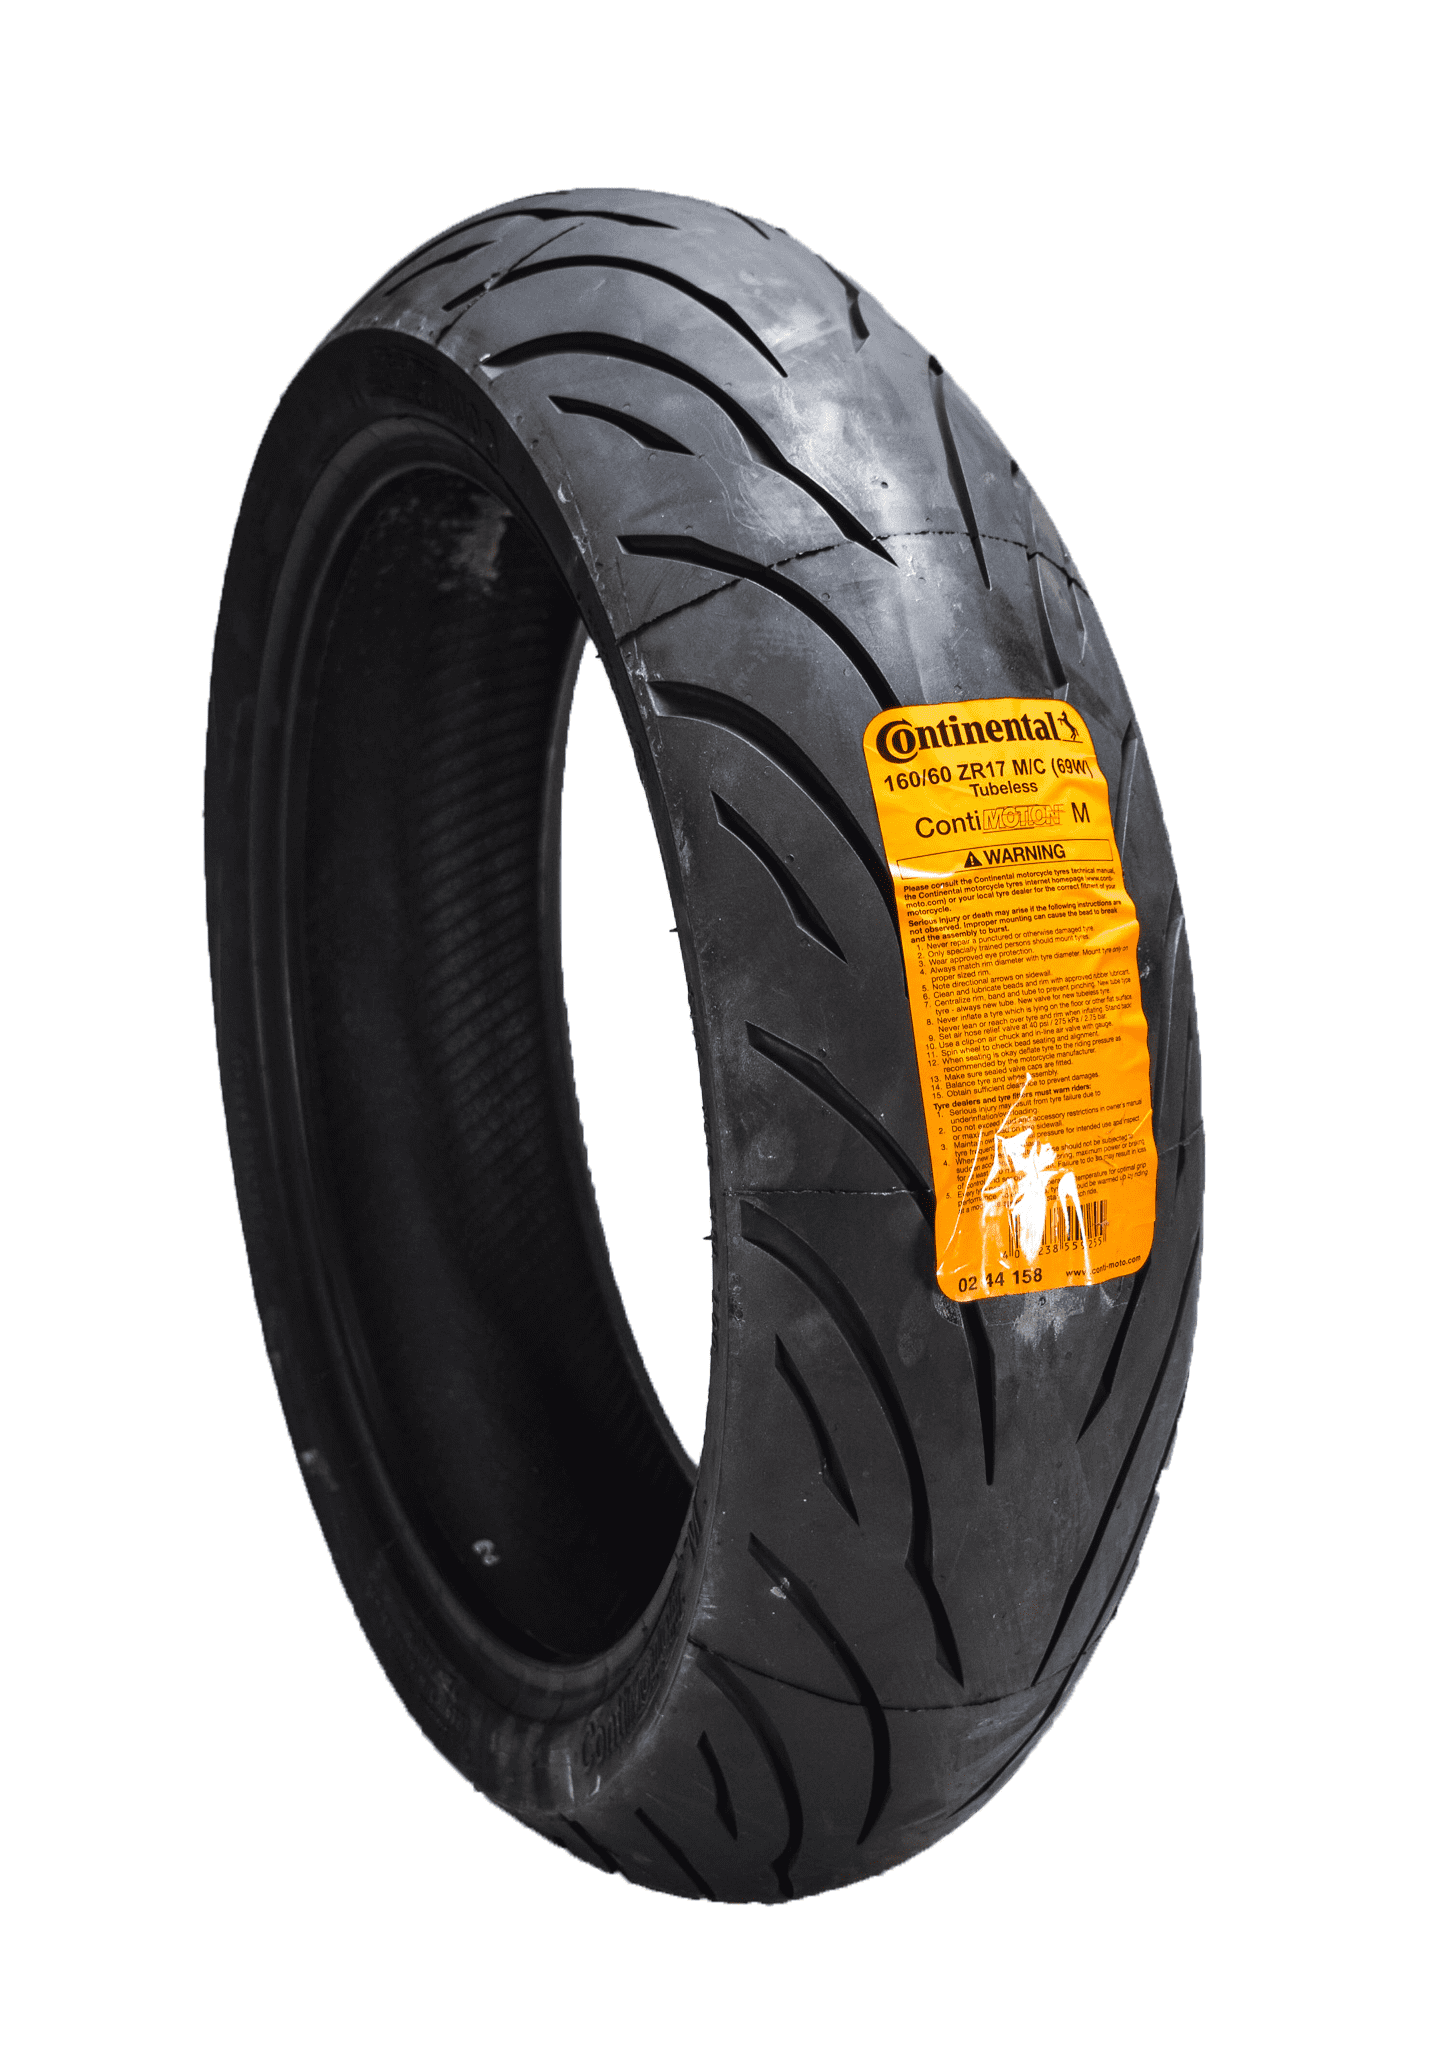 Honda Continental Conti Motion Motorcycle Tyres Pair 120/60ZR17 & 160/60ZR17 